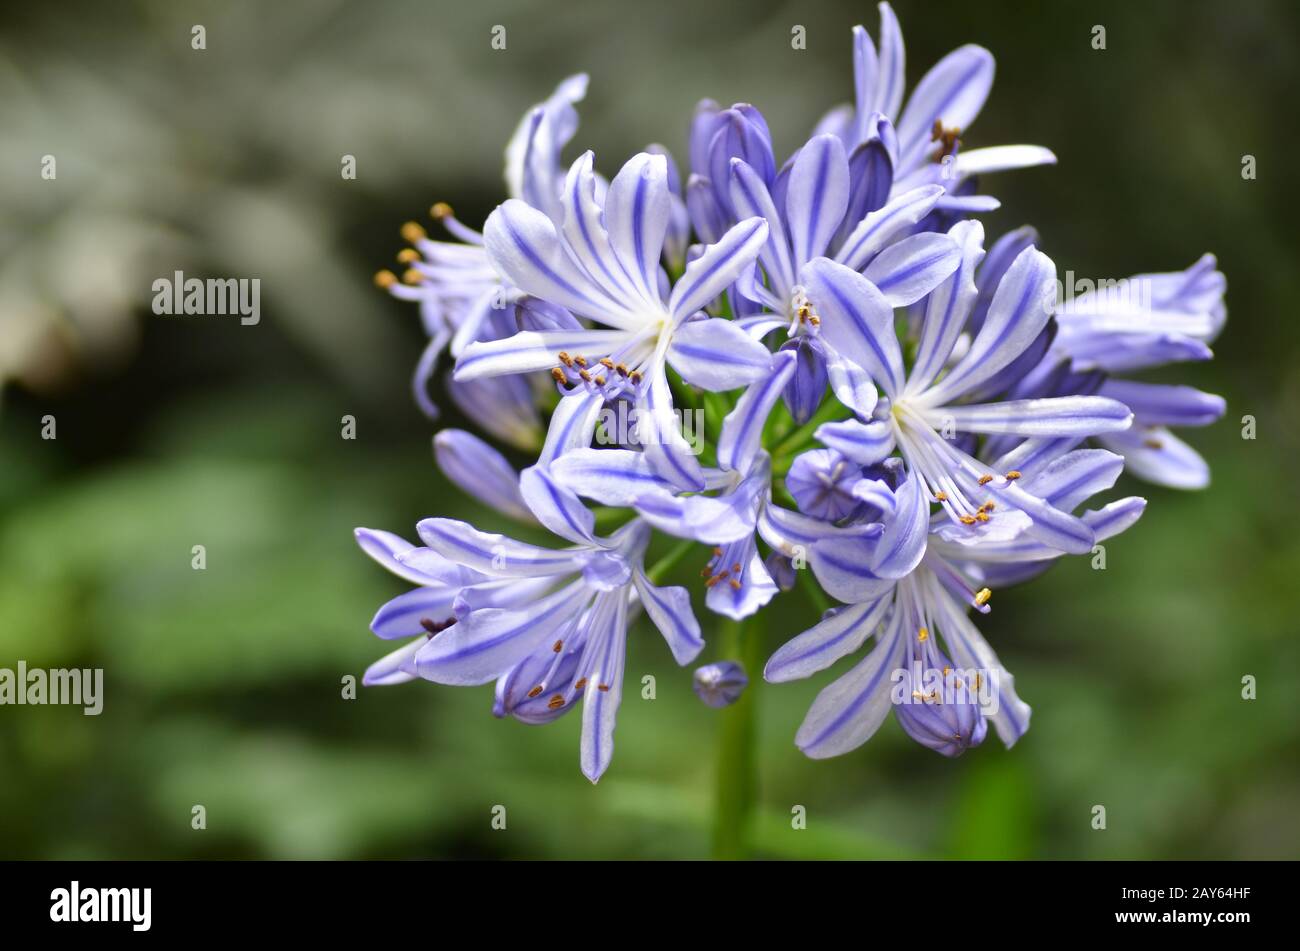 Flowers of the Agapanthus Stock Photo